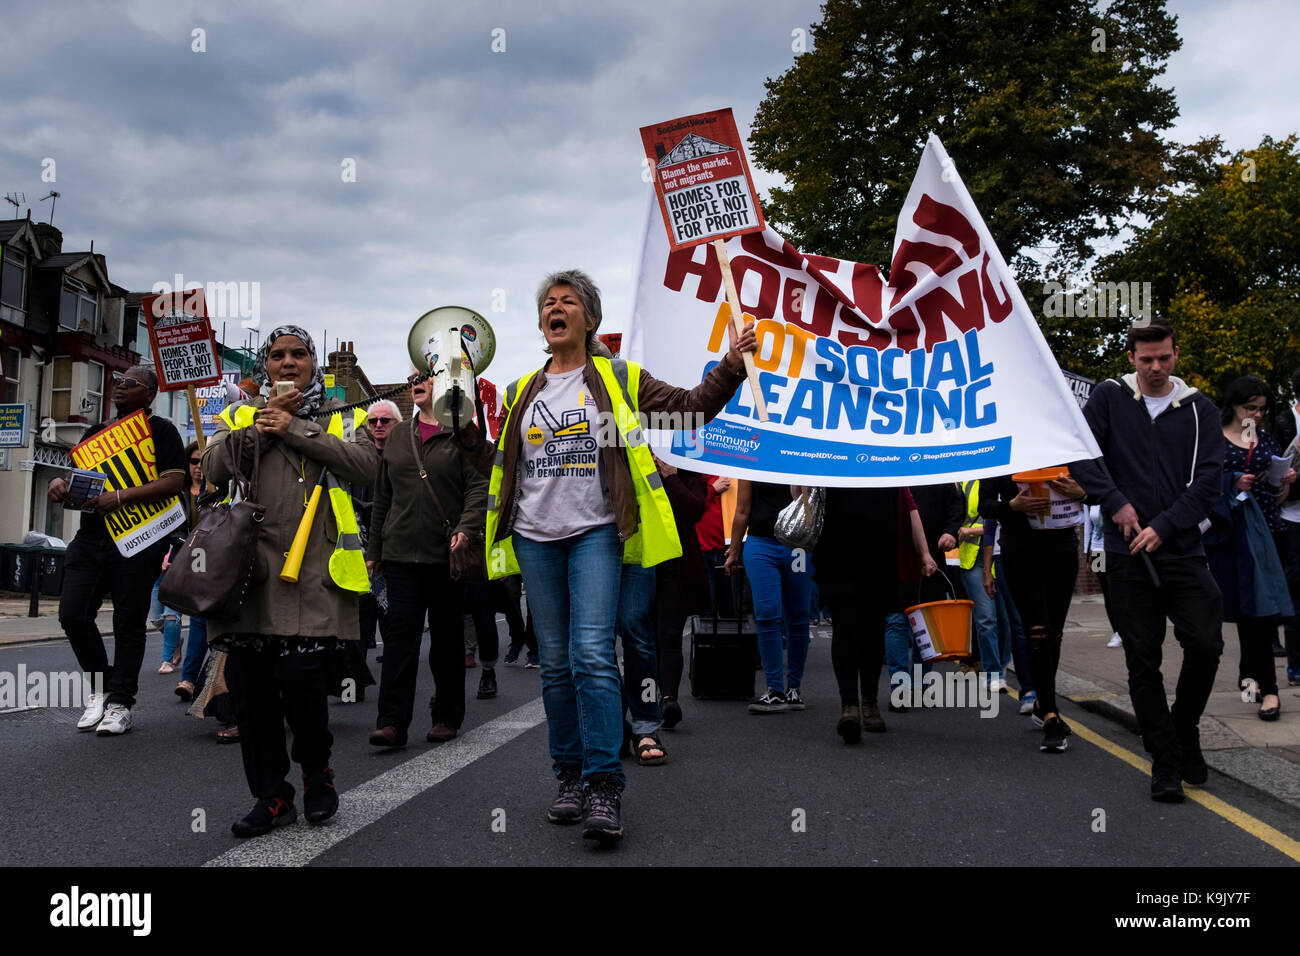 London, UK, 23rd September 2017. Protesters march down Green Lanes in Harringay, North London in protest of the trasfering of Haringey Council's social housing stock to the private developer Lendlease.The march started at Tottenham Green and finished at Finsbury Park. (c) Paul Swinney/Alamy Live News Stock Photo